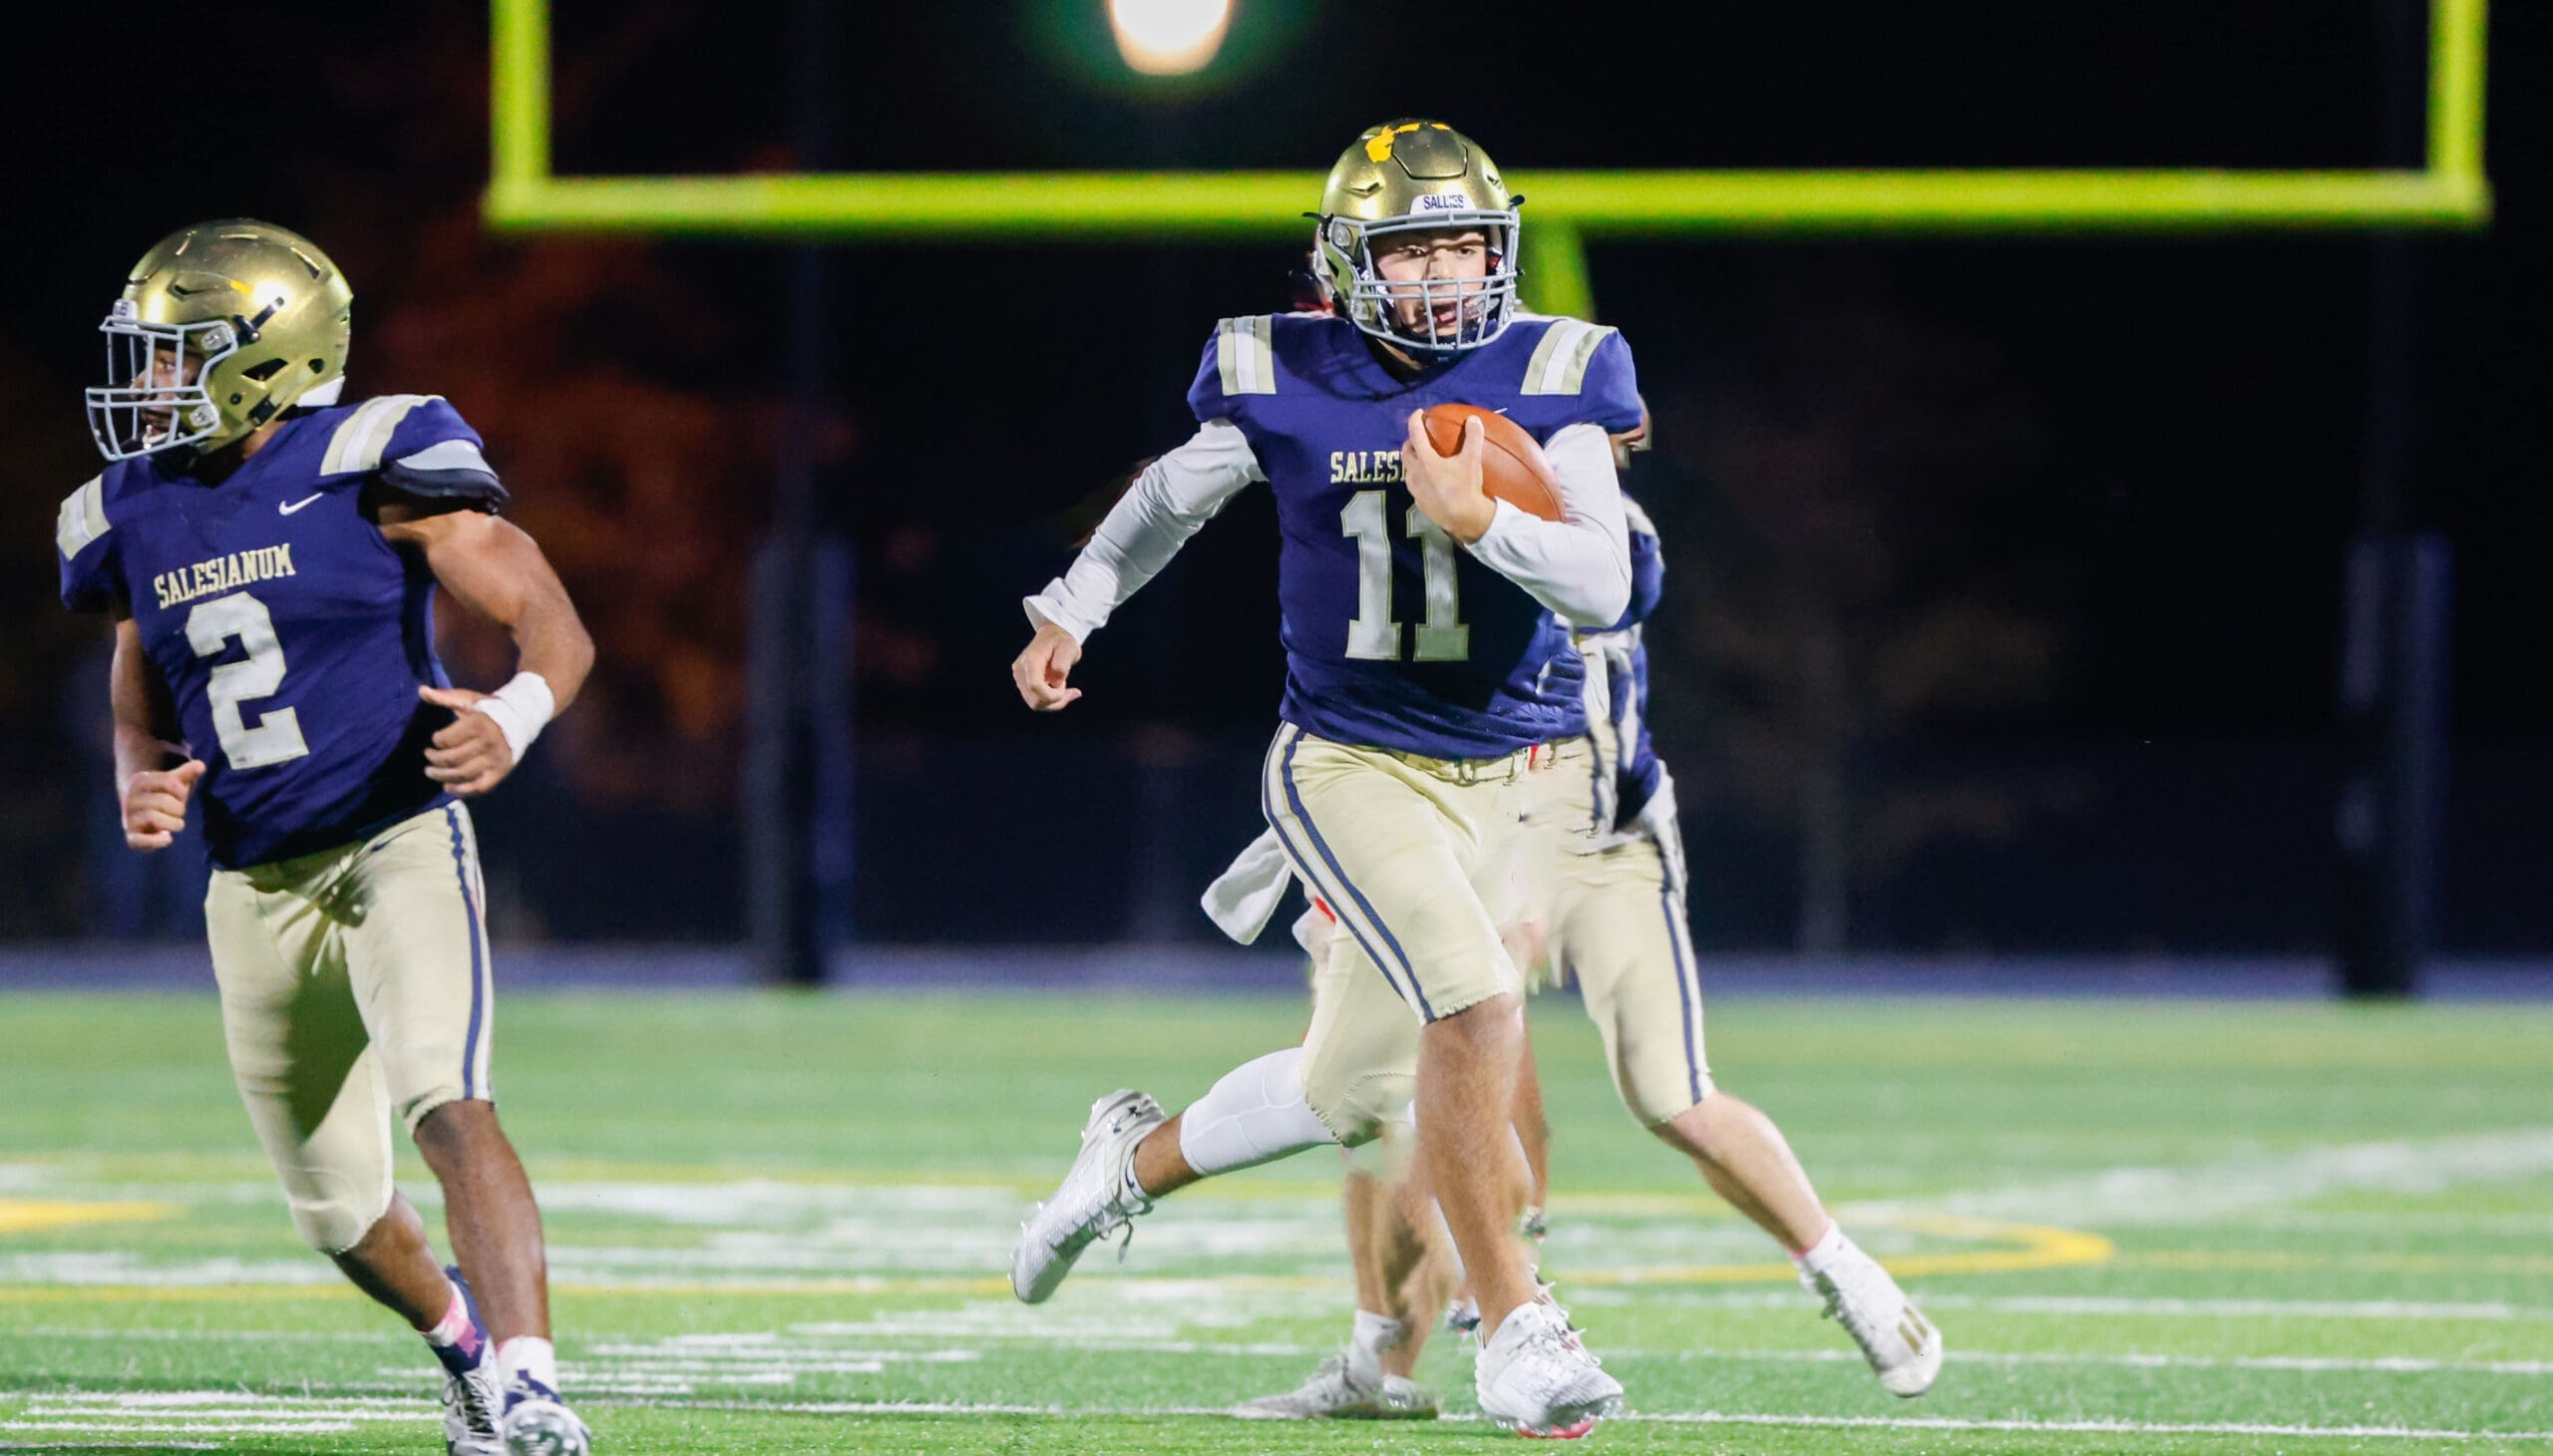 Featured image for “Salesianum earns trip to state championship”